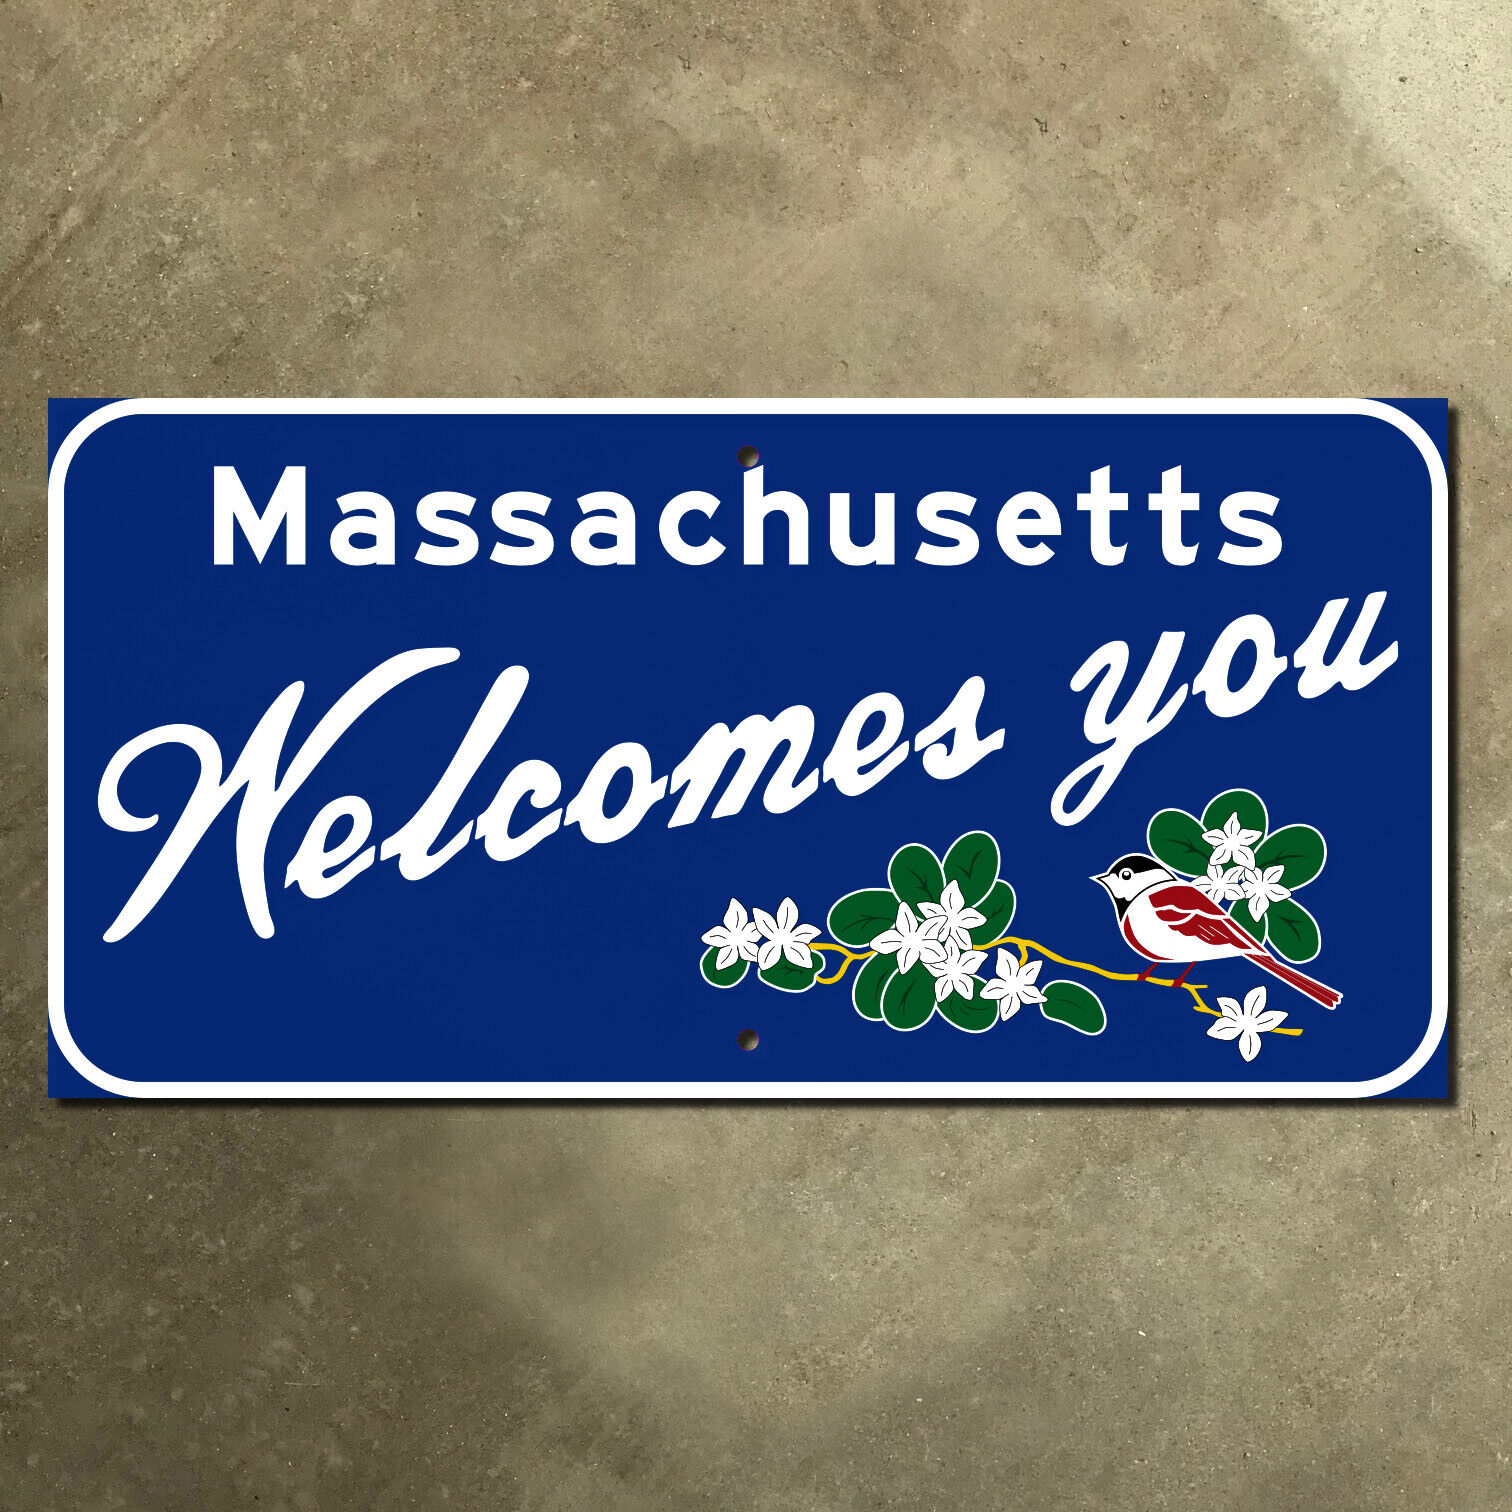 Massachusetts welcomes you road sign state line highway chickadee flower 16x8